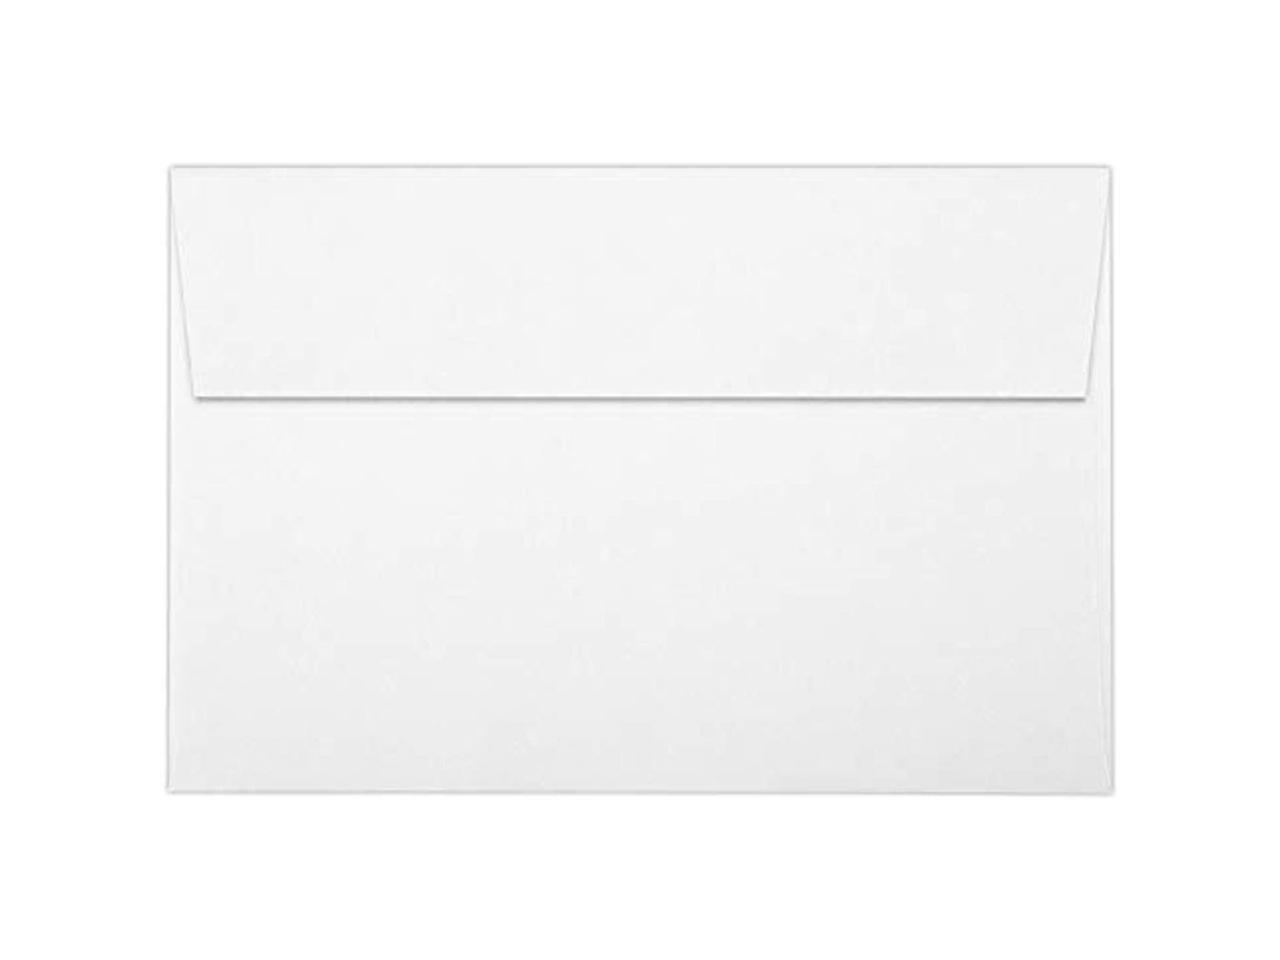 Envelope Size 5 3/4 x 8 3/4 50 Pack White with Peel and Press LUXPaper A9 Invitation Envelopes in 80 lb Printable Envelopes for Invitations White for 5 1/2 x 8 1/2 Cards 